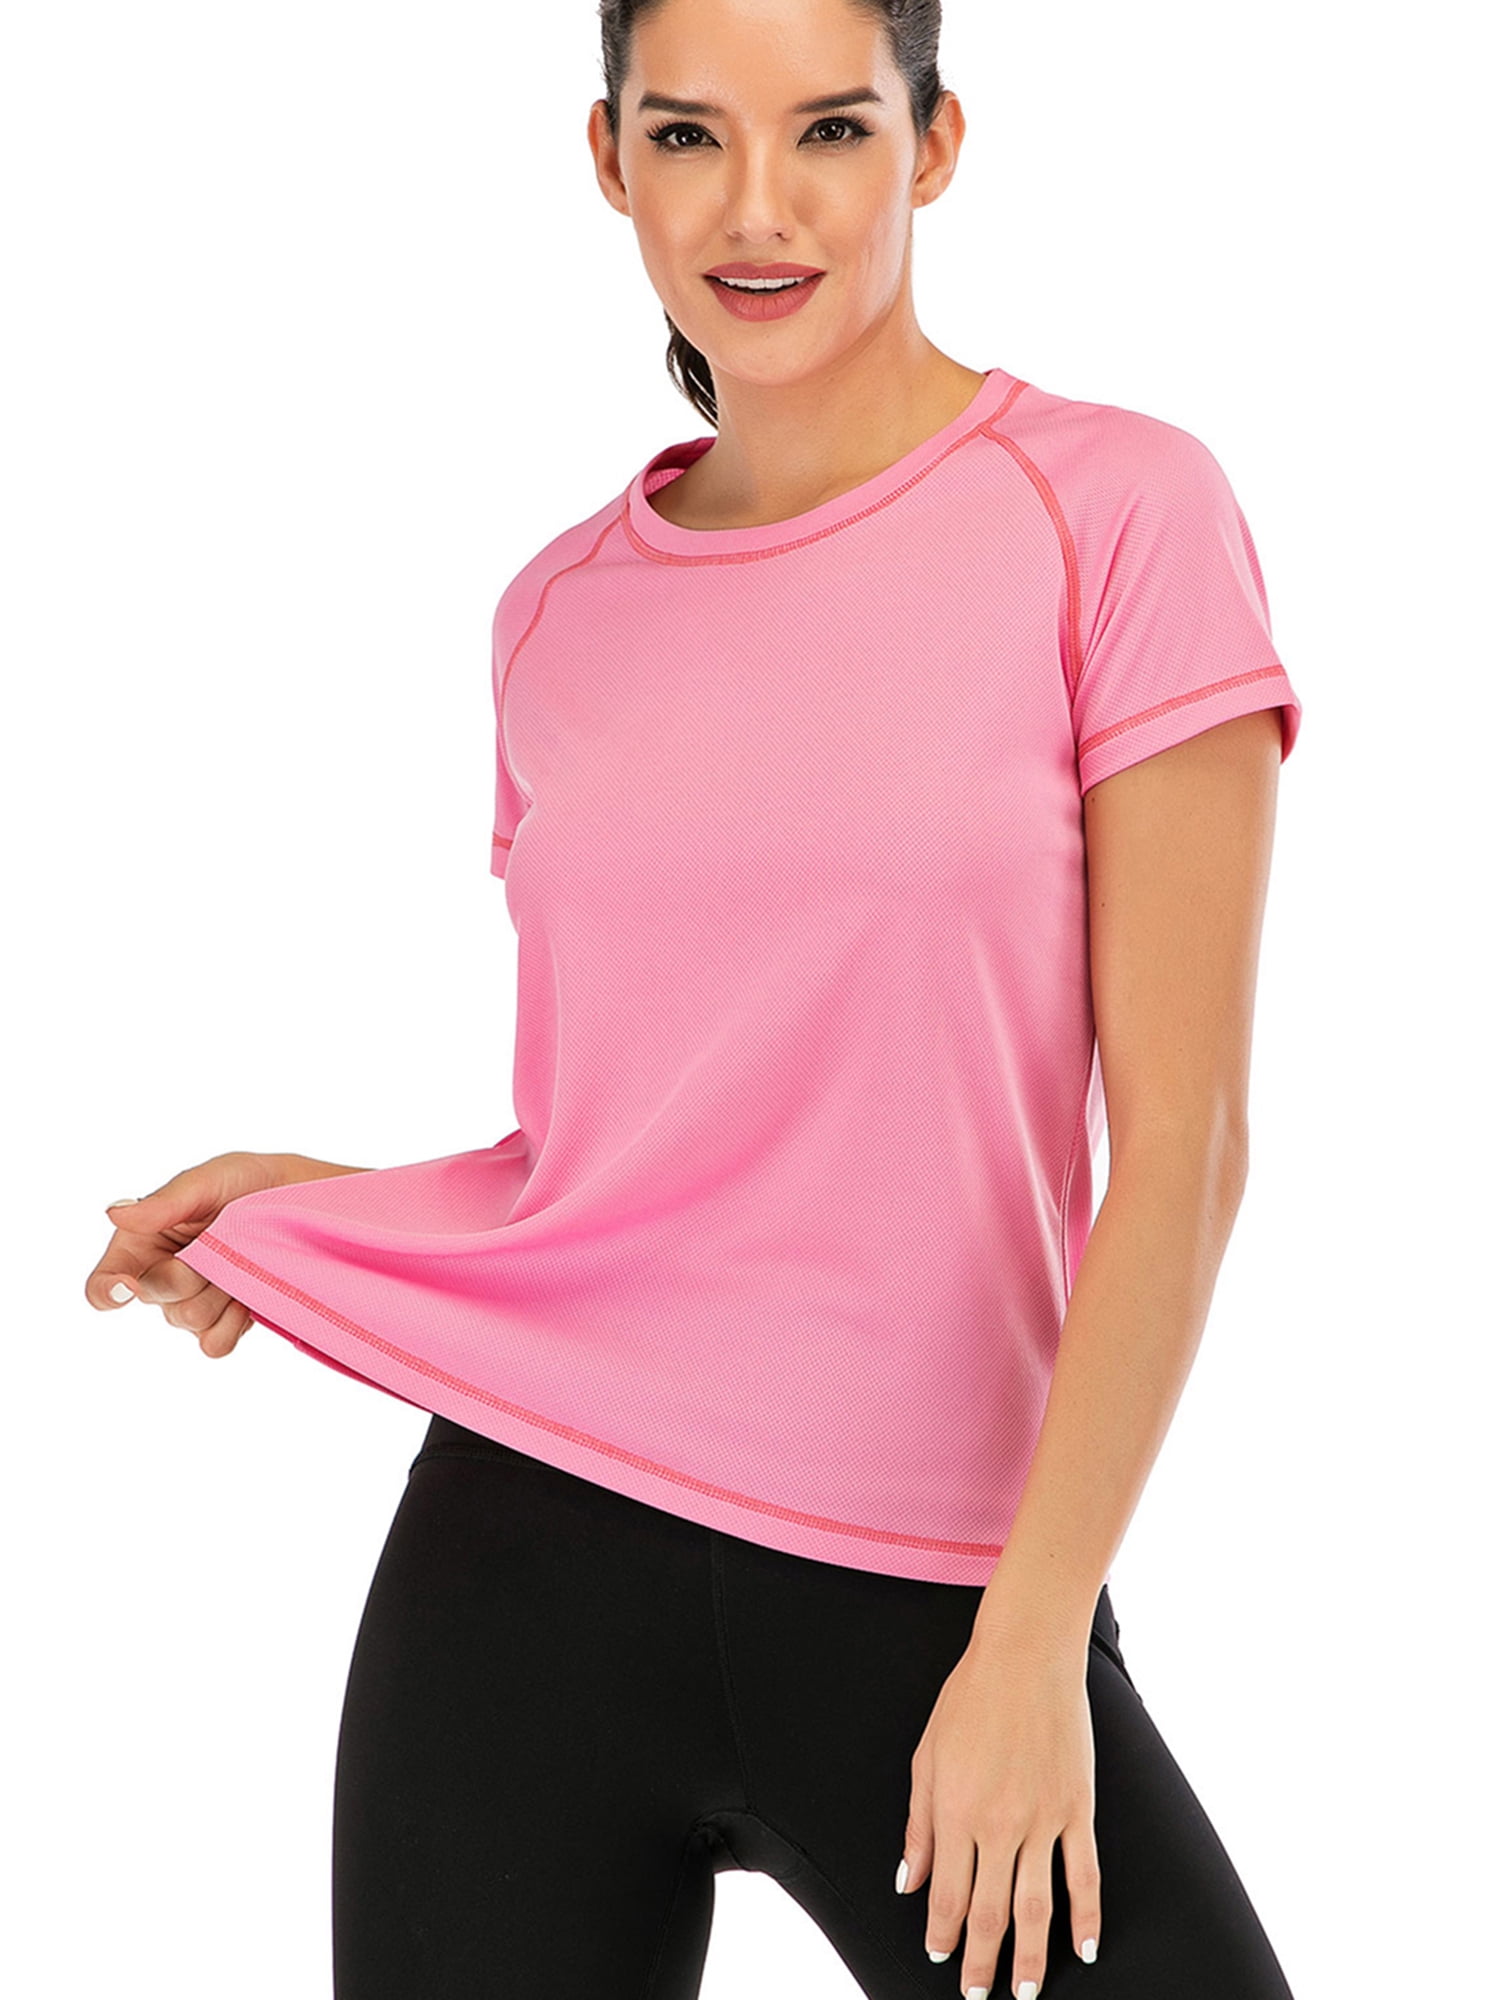 yoga tops with sleeves